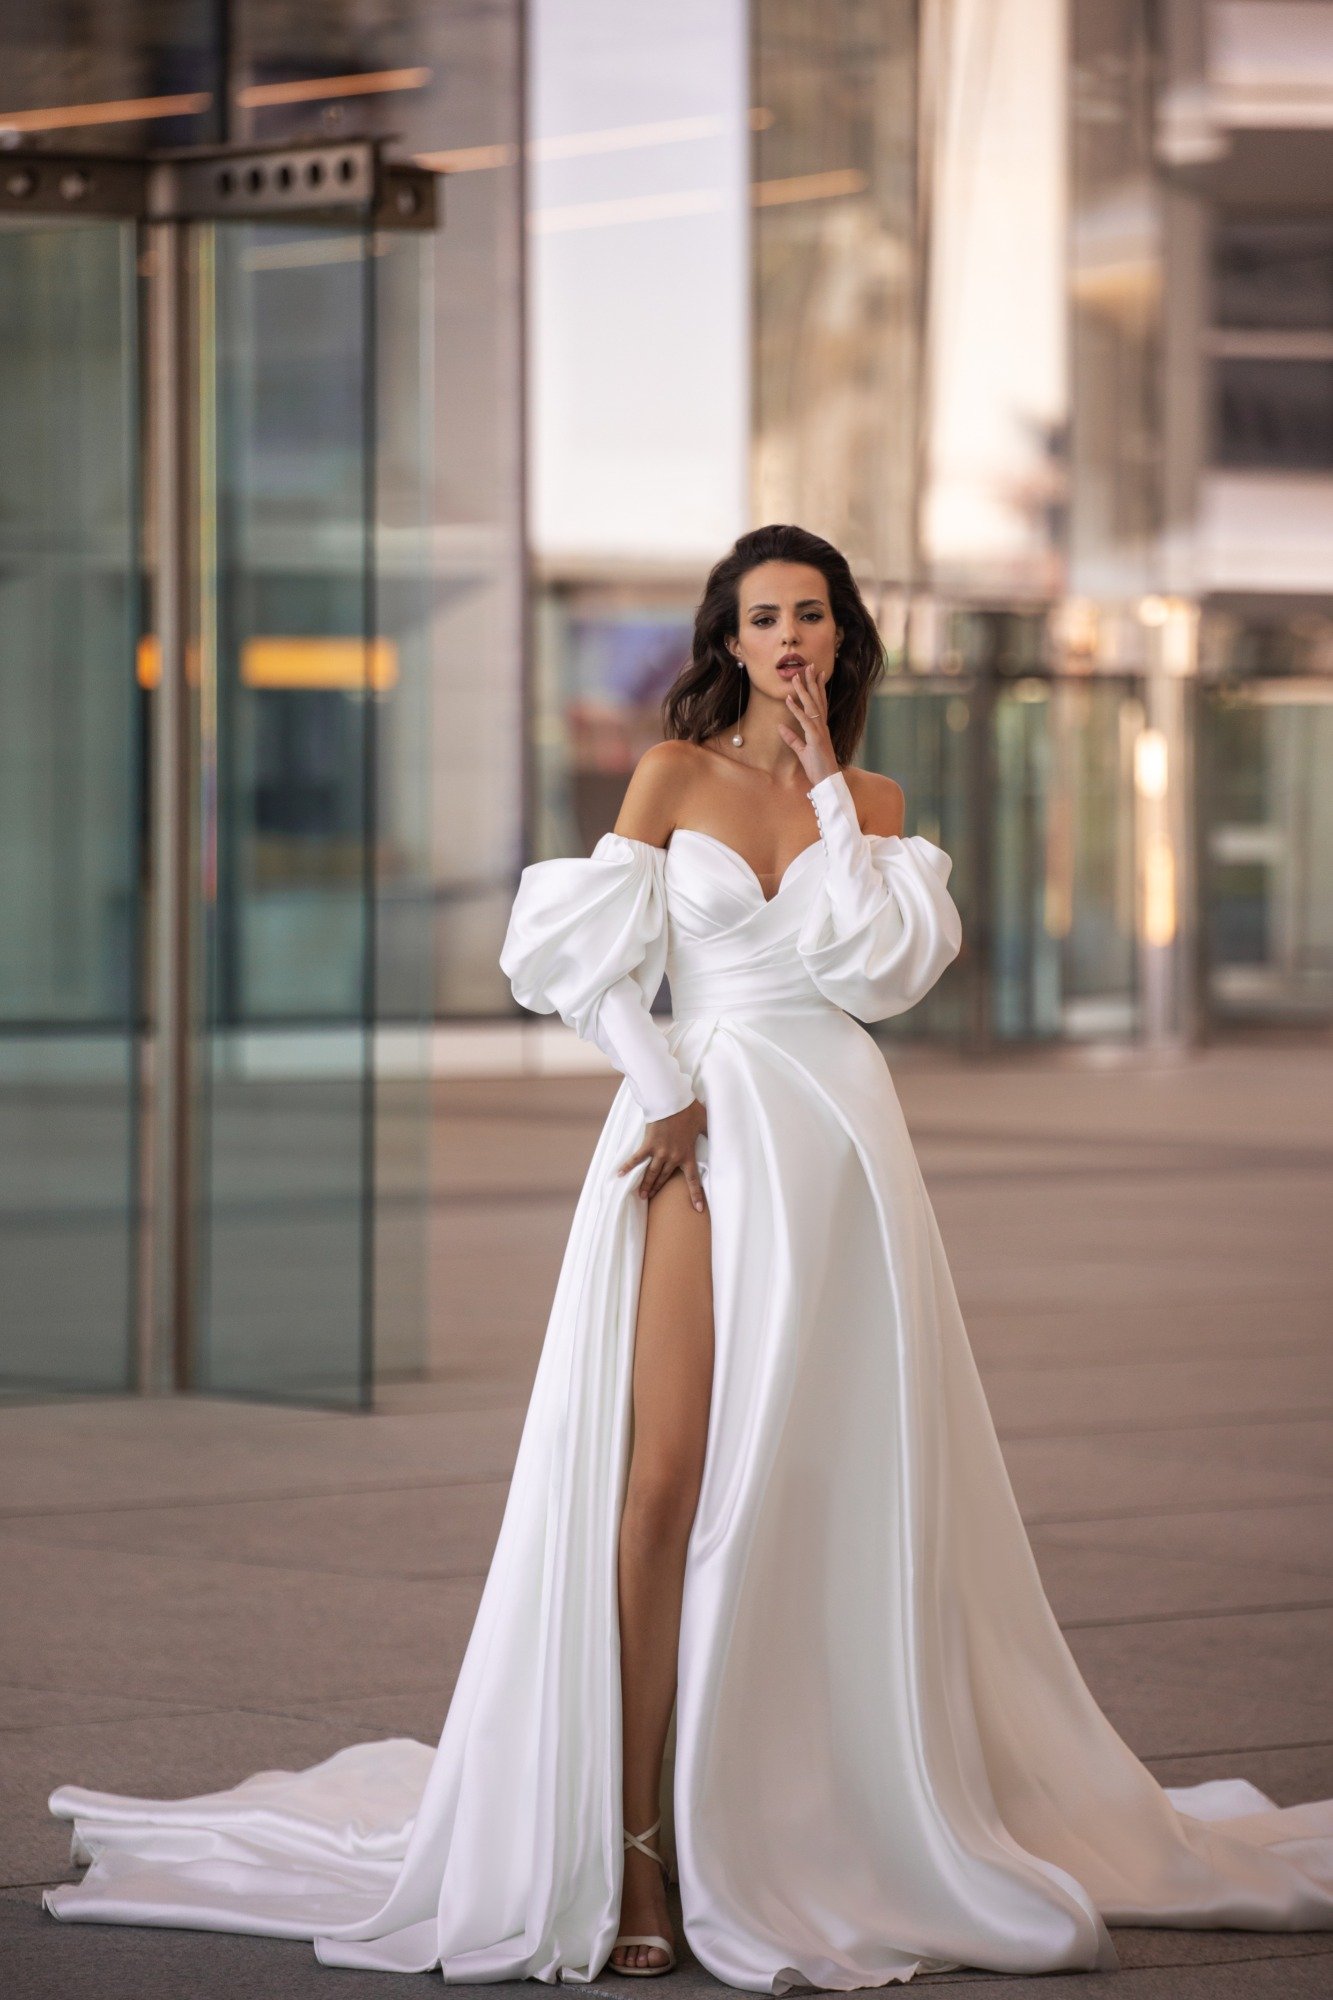 City Bride Or Fairytale Bride, Pollardi Has Just The Dress For You